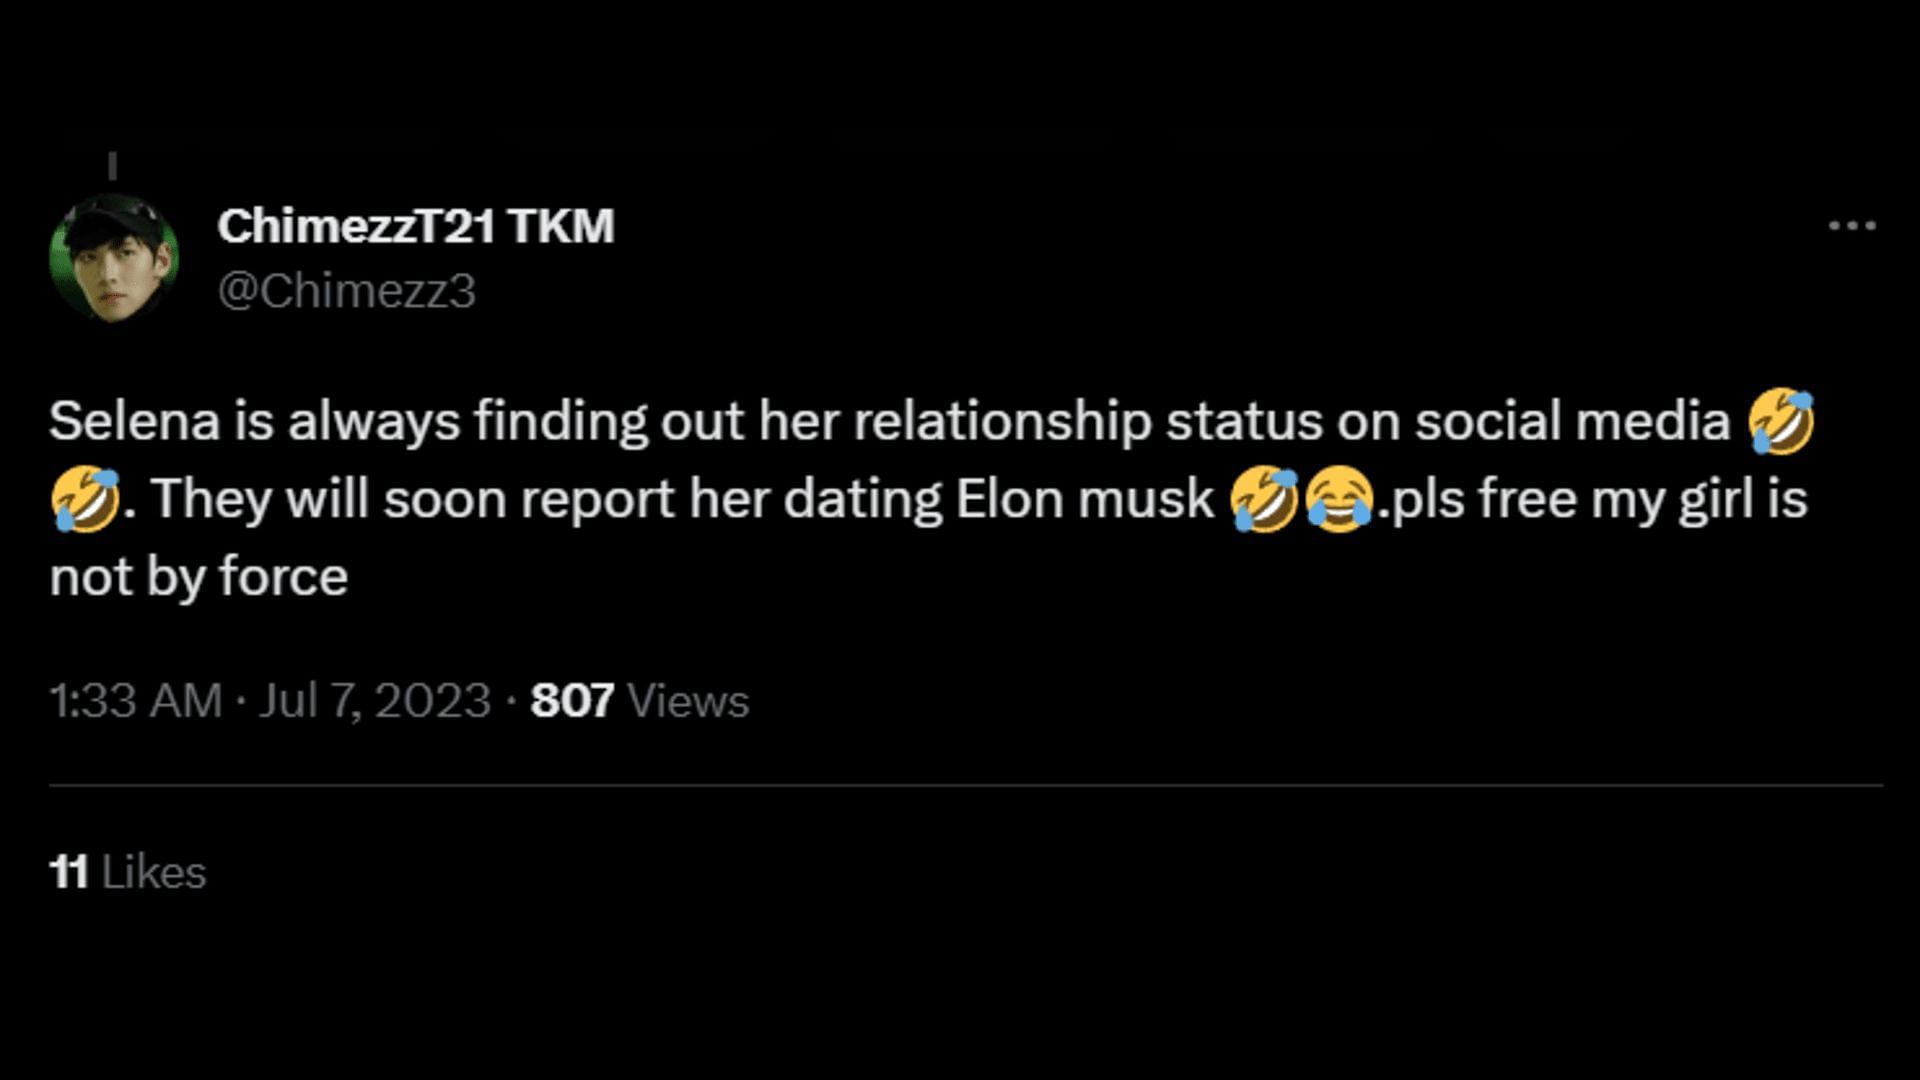 A netizen hilariously says how Selena always finds out her relationship status from social media. (Image via Twitter/ChimezzT21 TKM)